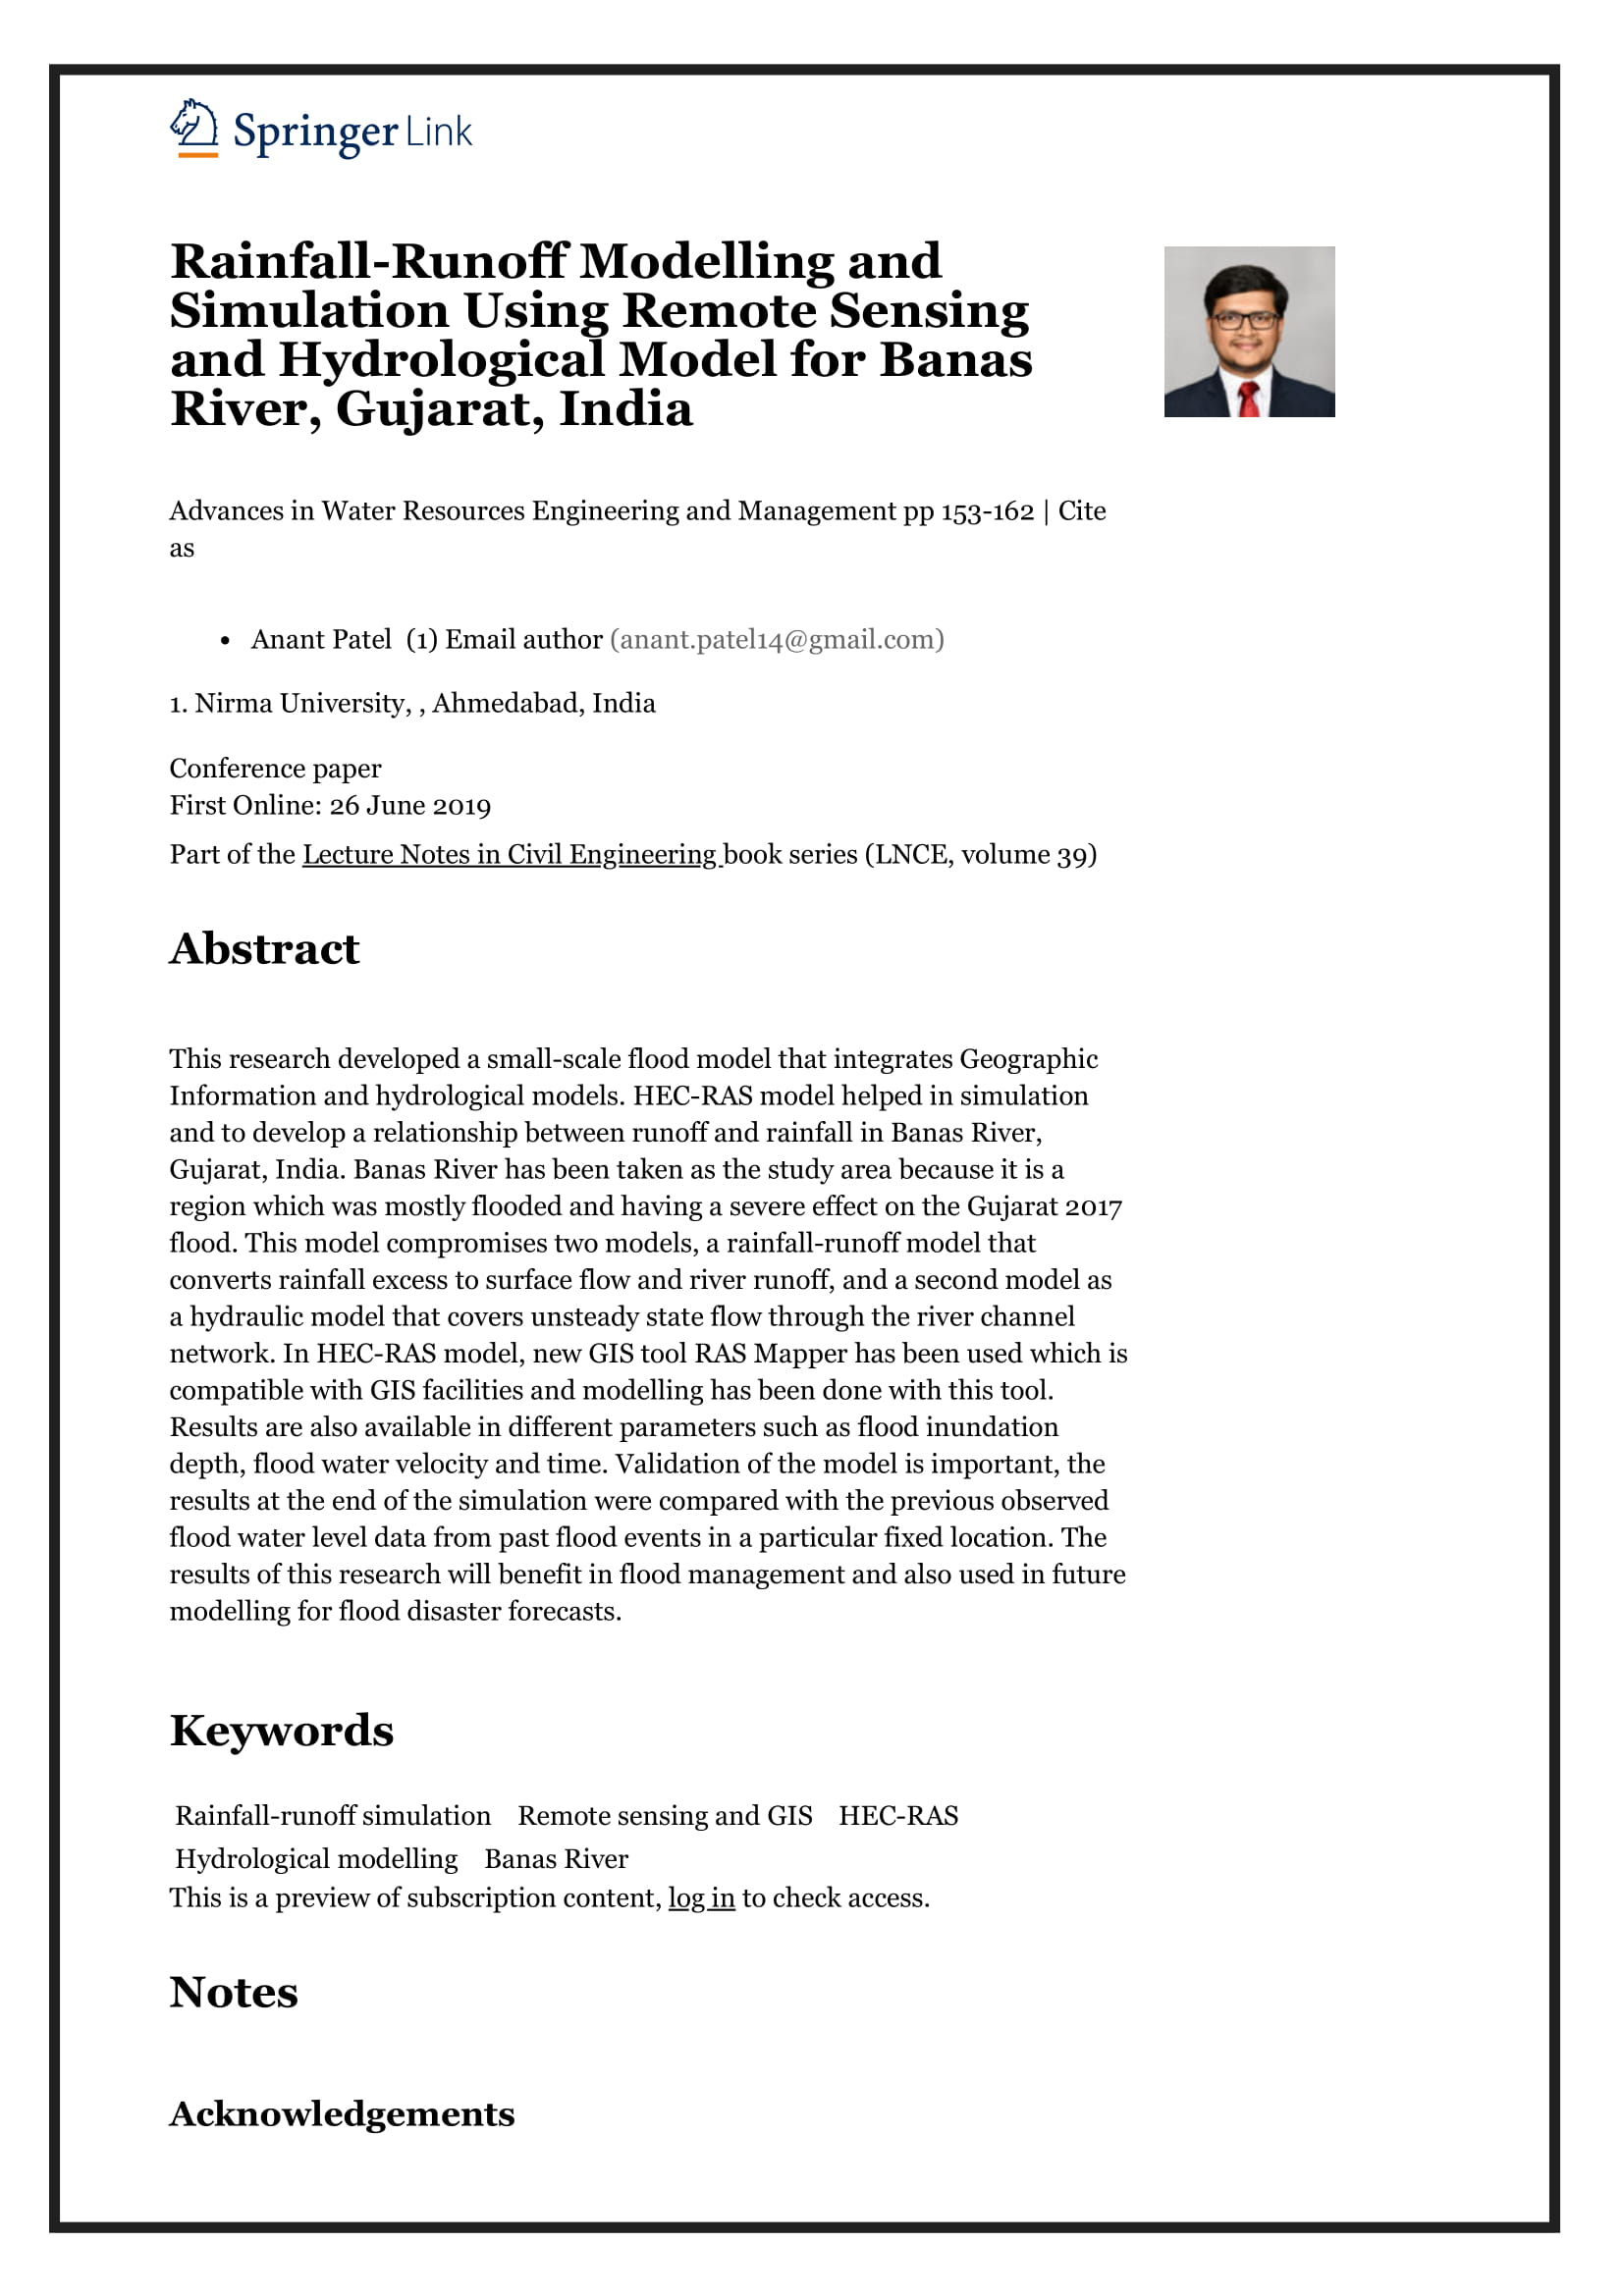 Rainfall-Runoff Modelling and Simulation Using Remote Sensing and Hydrological Model for Banas River, Gujarat, India